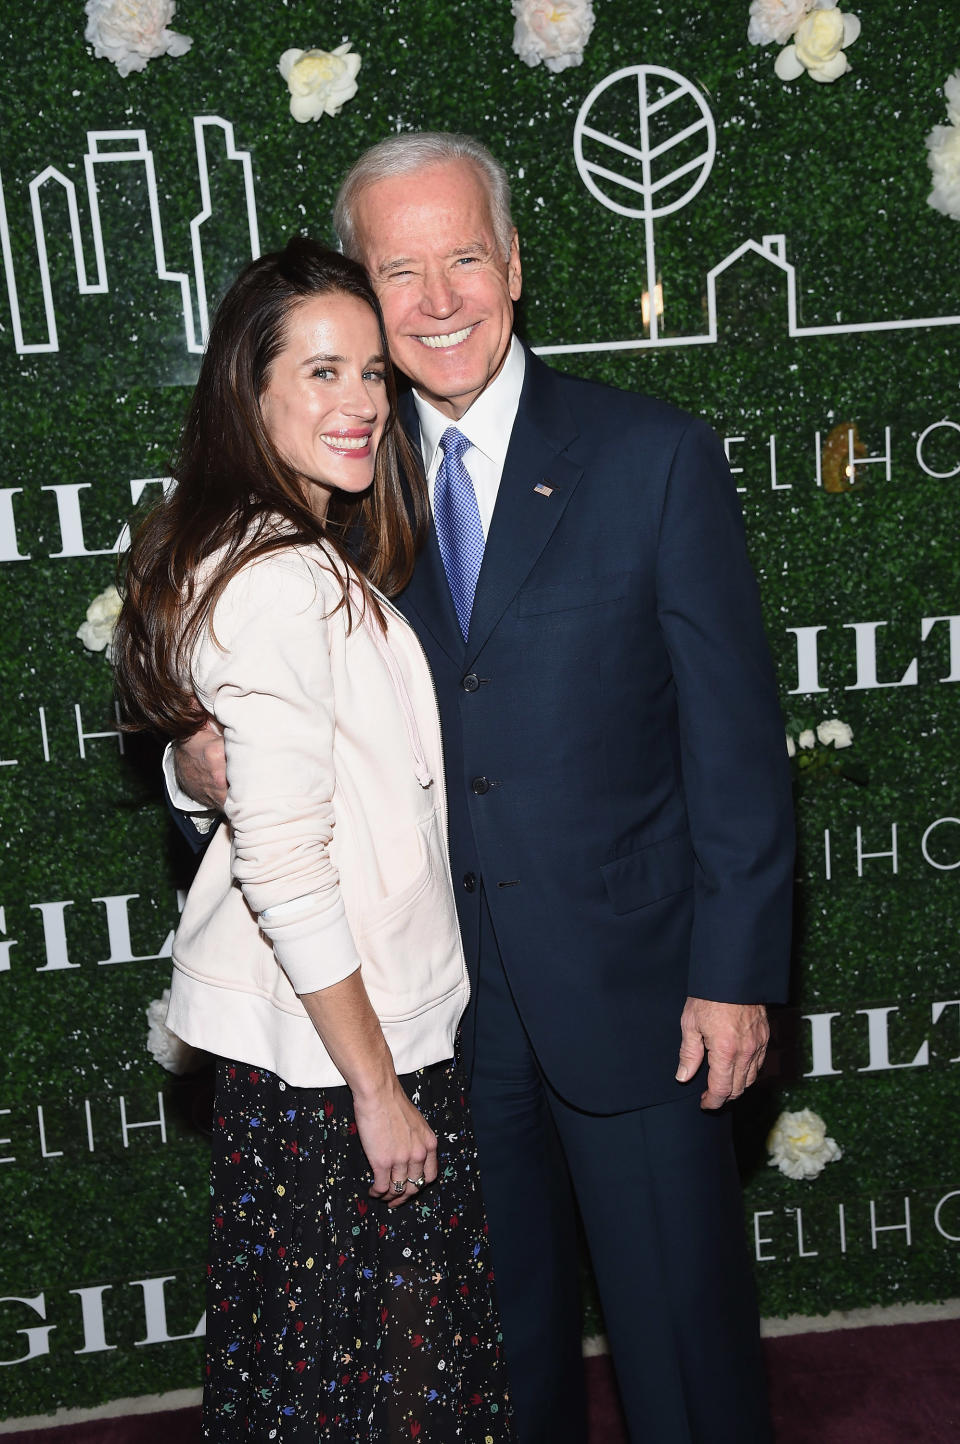 Ashley Biden and Joe Biden attend Gilt x Livelihood launch event at Spring Place on February 7, 2017 in New York City.